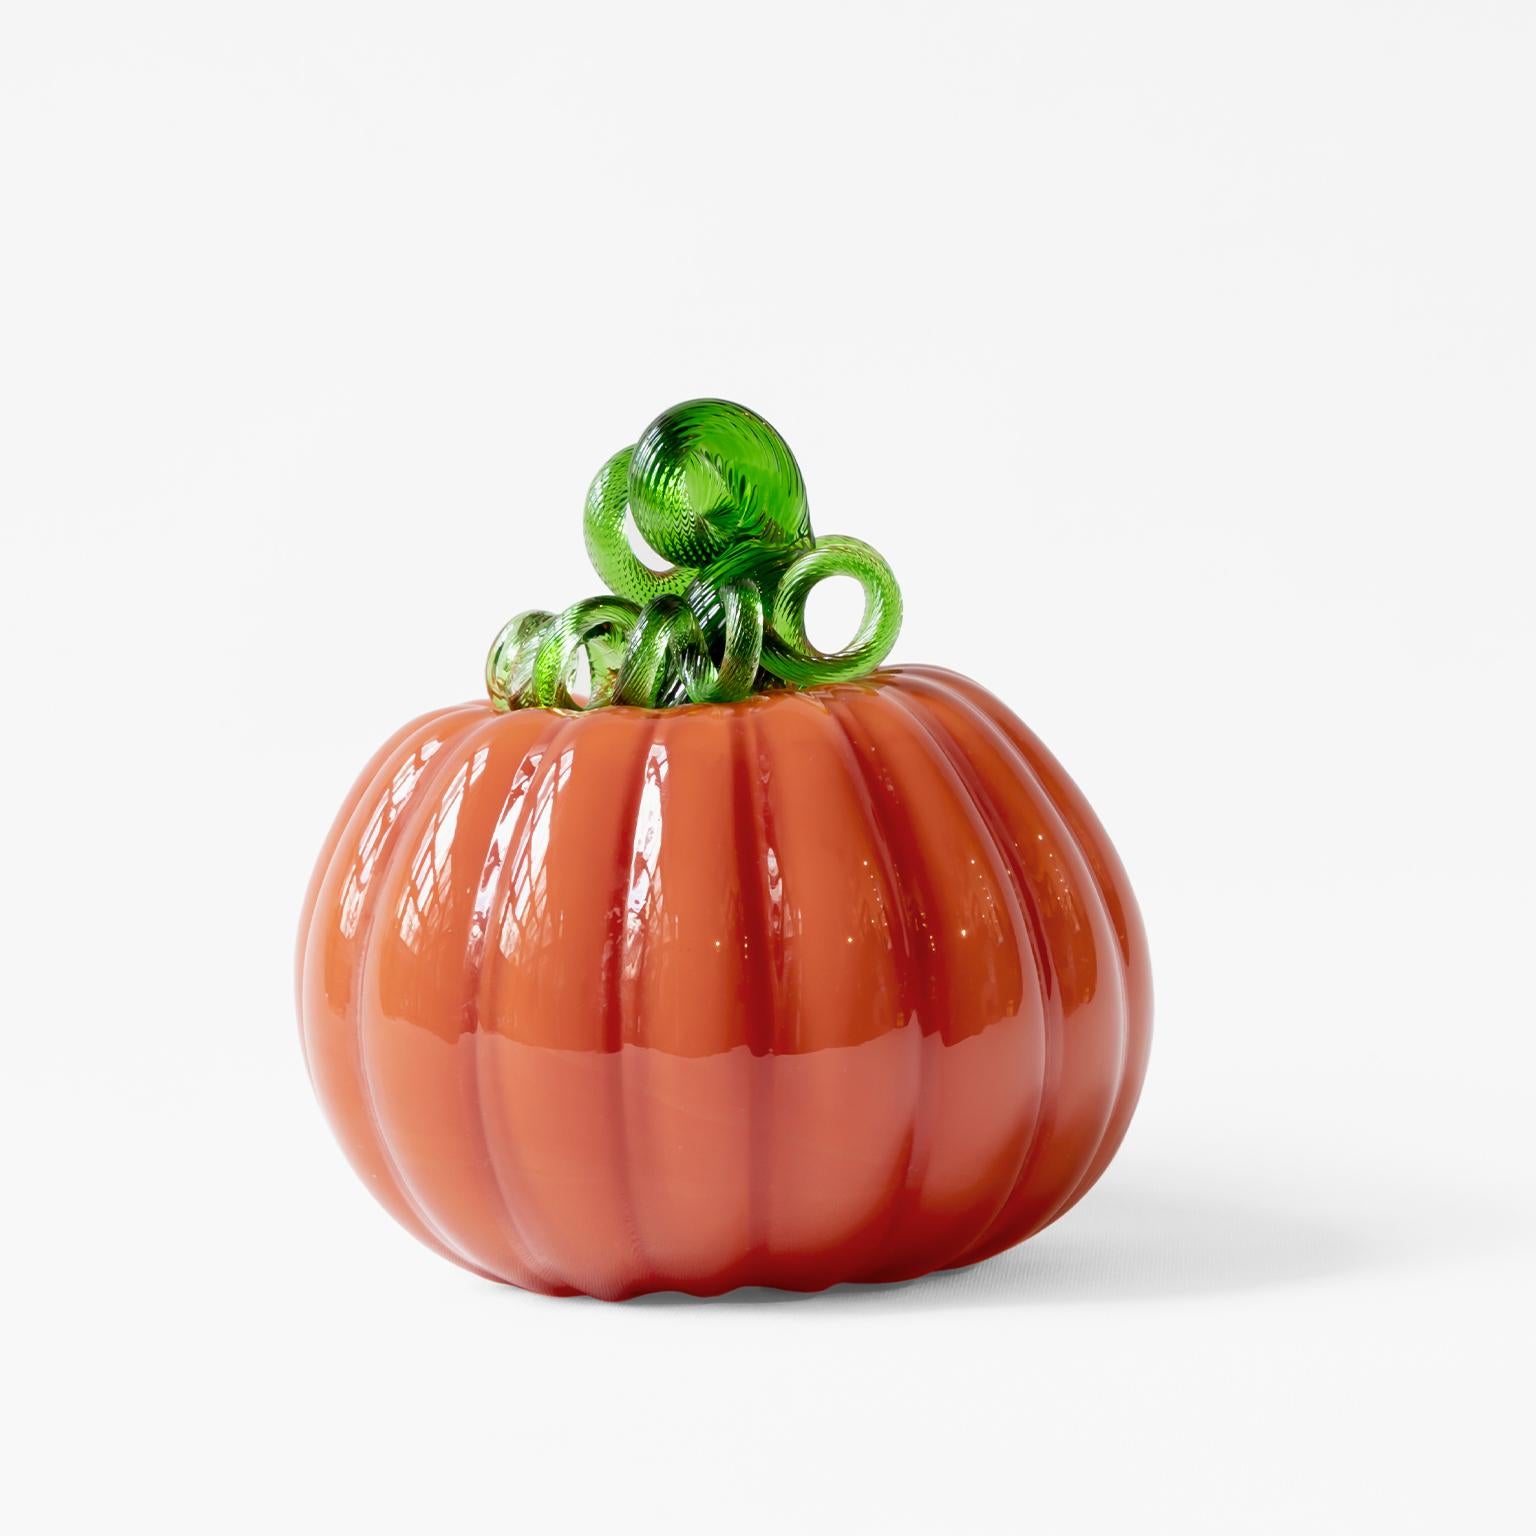 CORAL PUMPKIN, where beautiful colors come together in the form of a pumpkin, is a candidate to add color to your home!
-Made from hand blown glass
-A unique hand made decorative object
-Designed by experienced glass blowers in a pumpkin